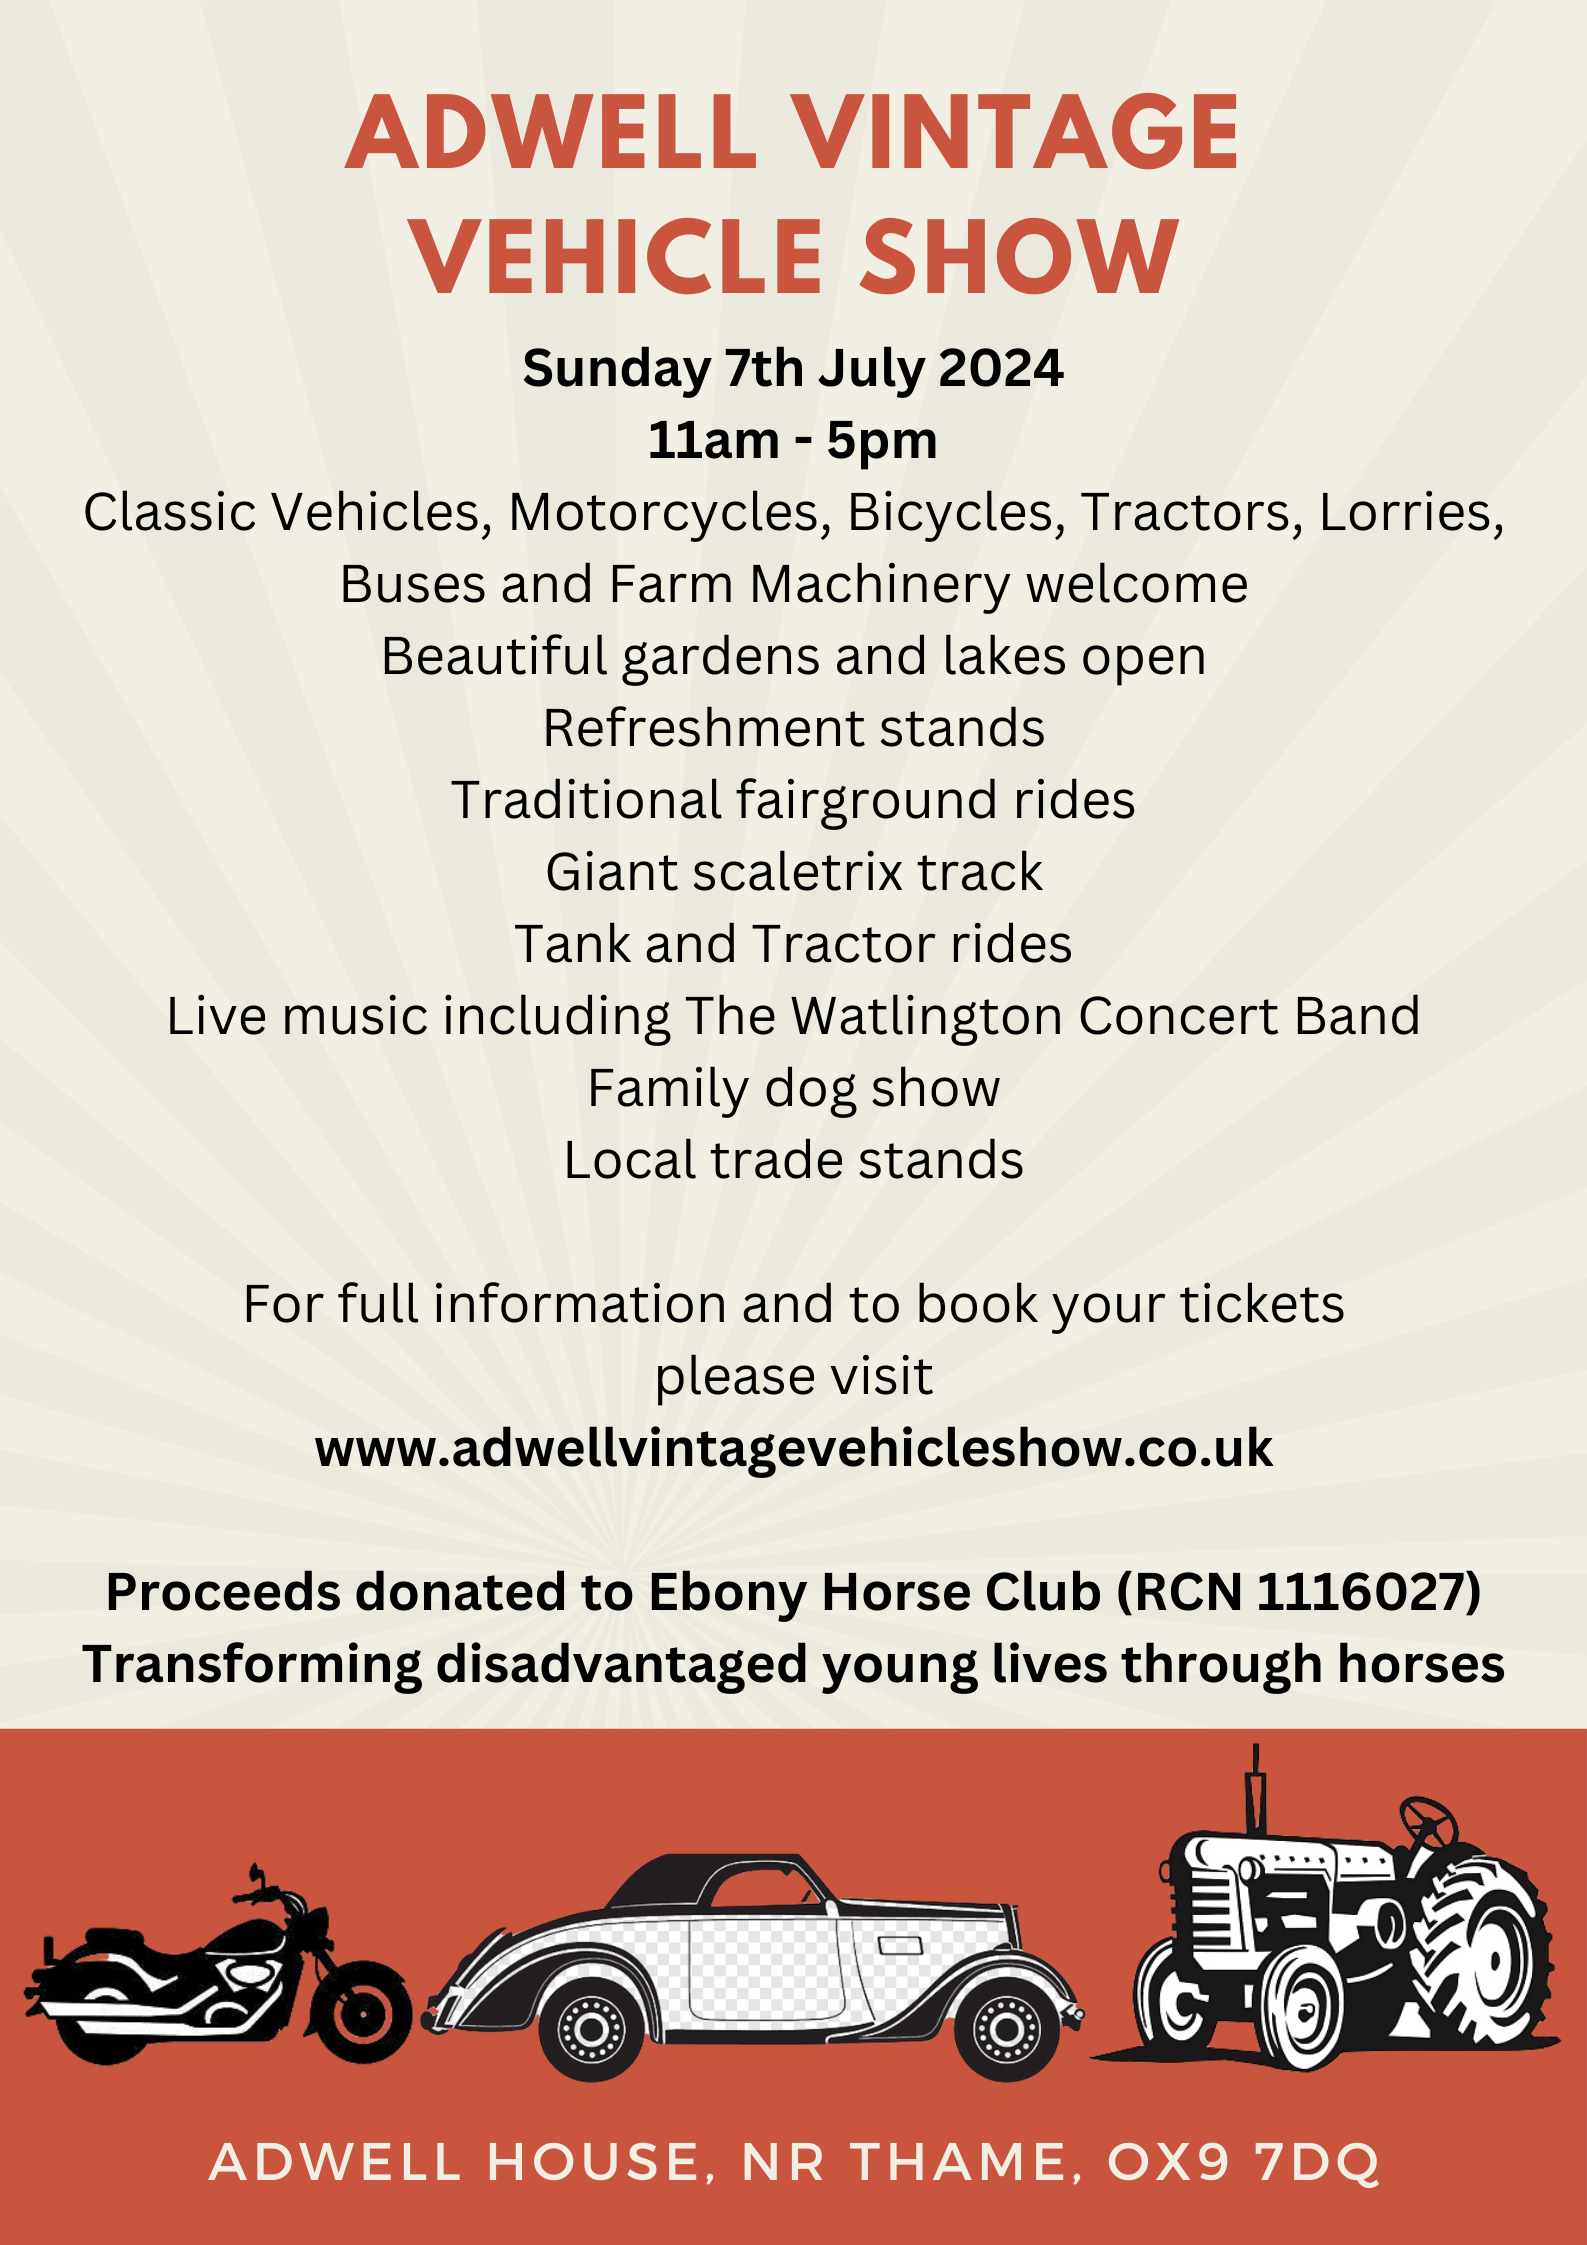 Adwell Vintage Vehicle Show 2024